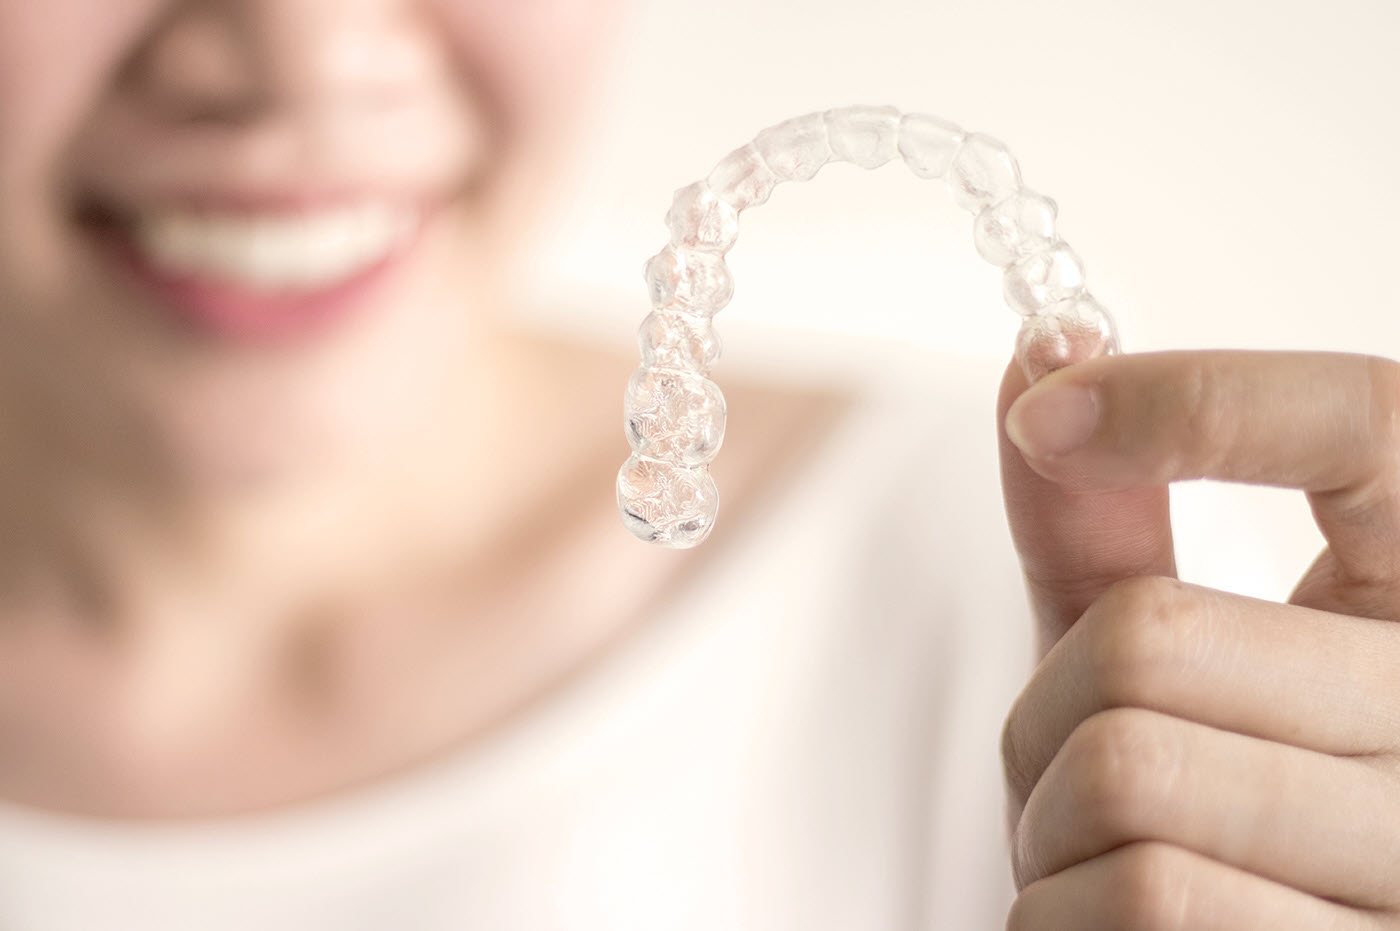 Person holding up a clear orthodontic retainer.